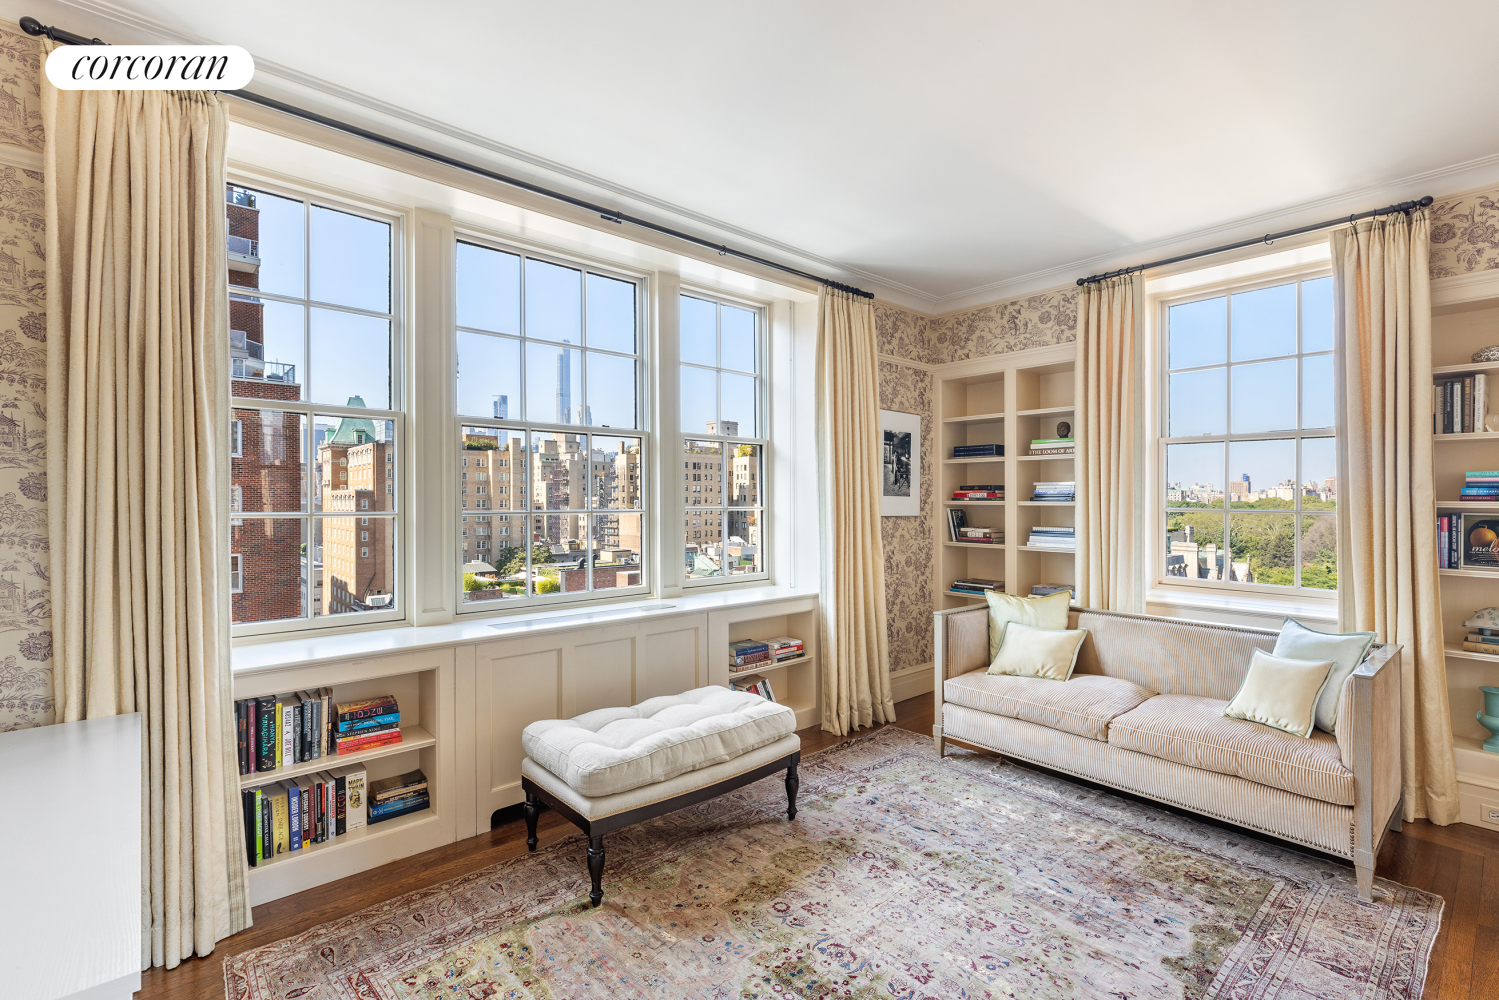 39 East 79th Street 10/11A Upper East Side New York, NY 10075